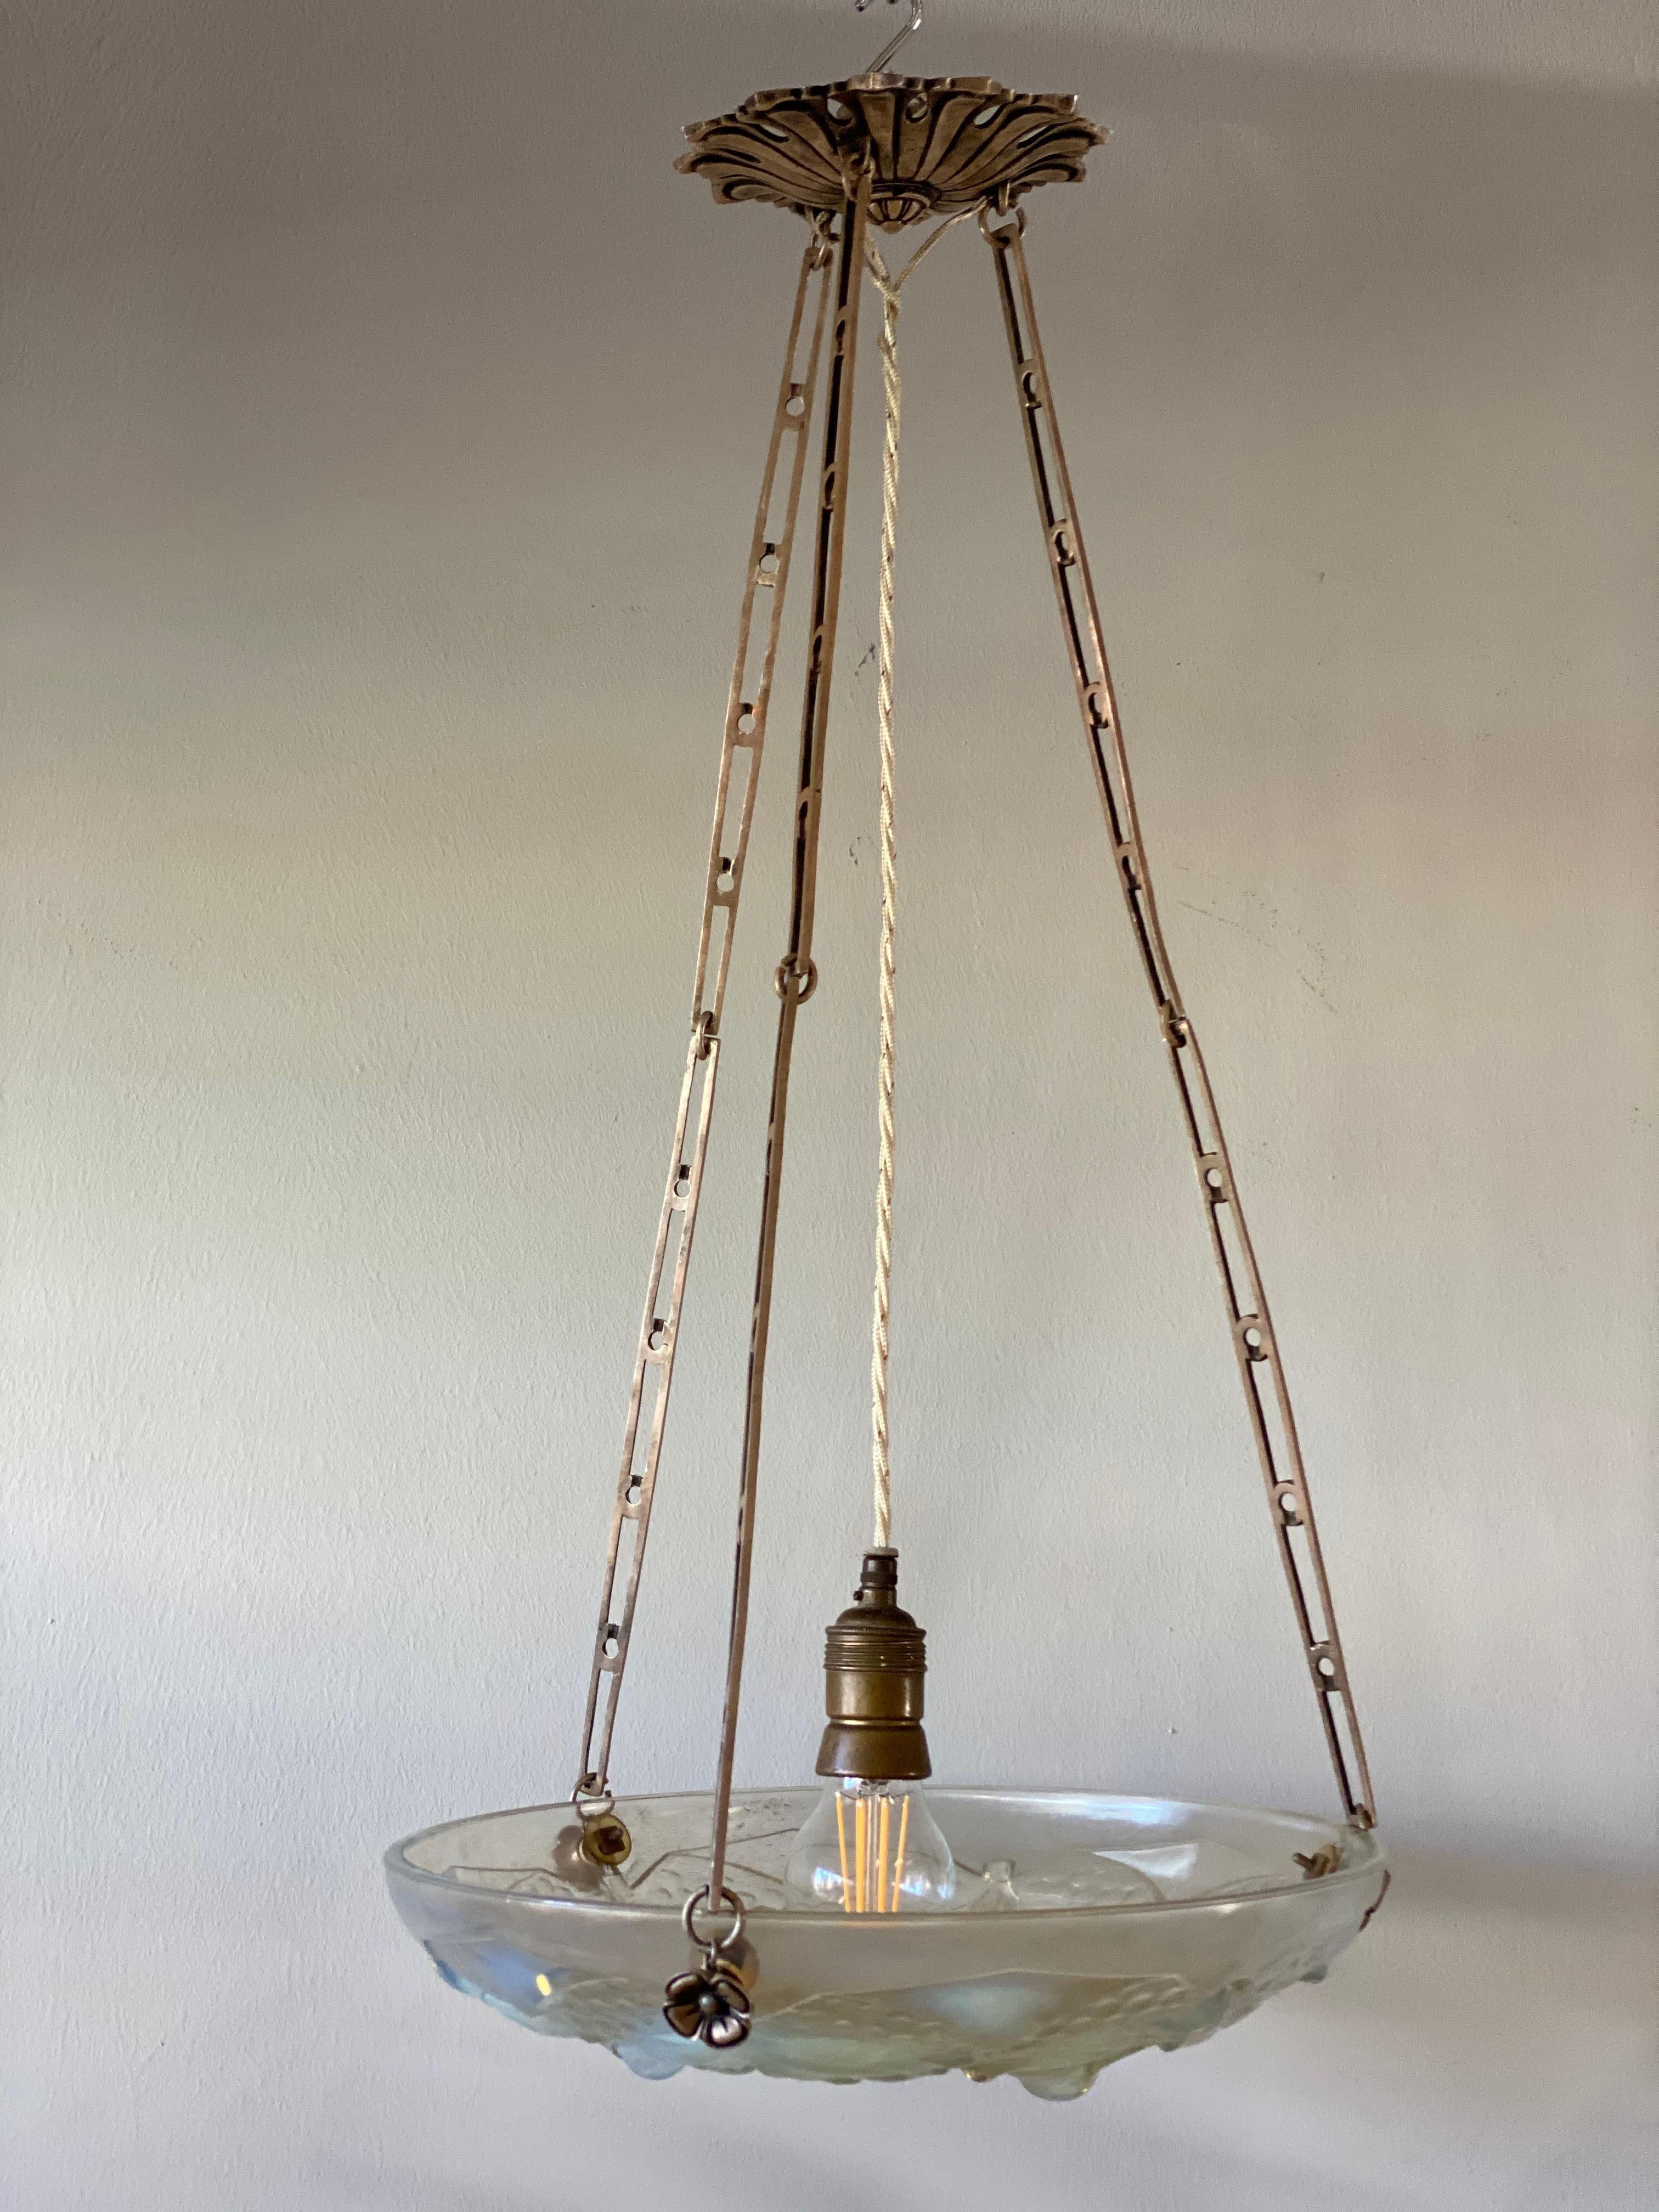 This special Art Deco pendant lamp made of opaline glass or iridescent glass enchants you in no time. The magically shimmering glass shade with cherry - decor hangs on three decorative chains made of metal. The cover of the cables and ceiling